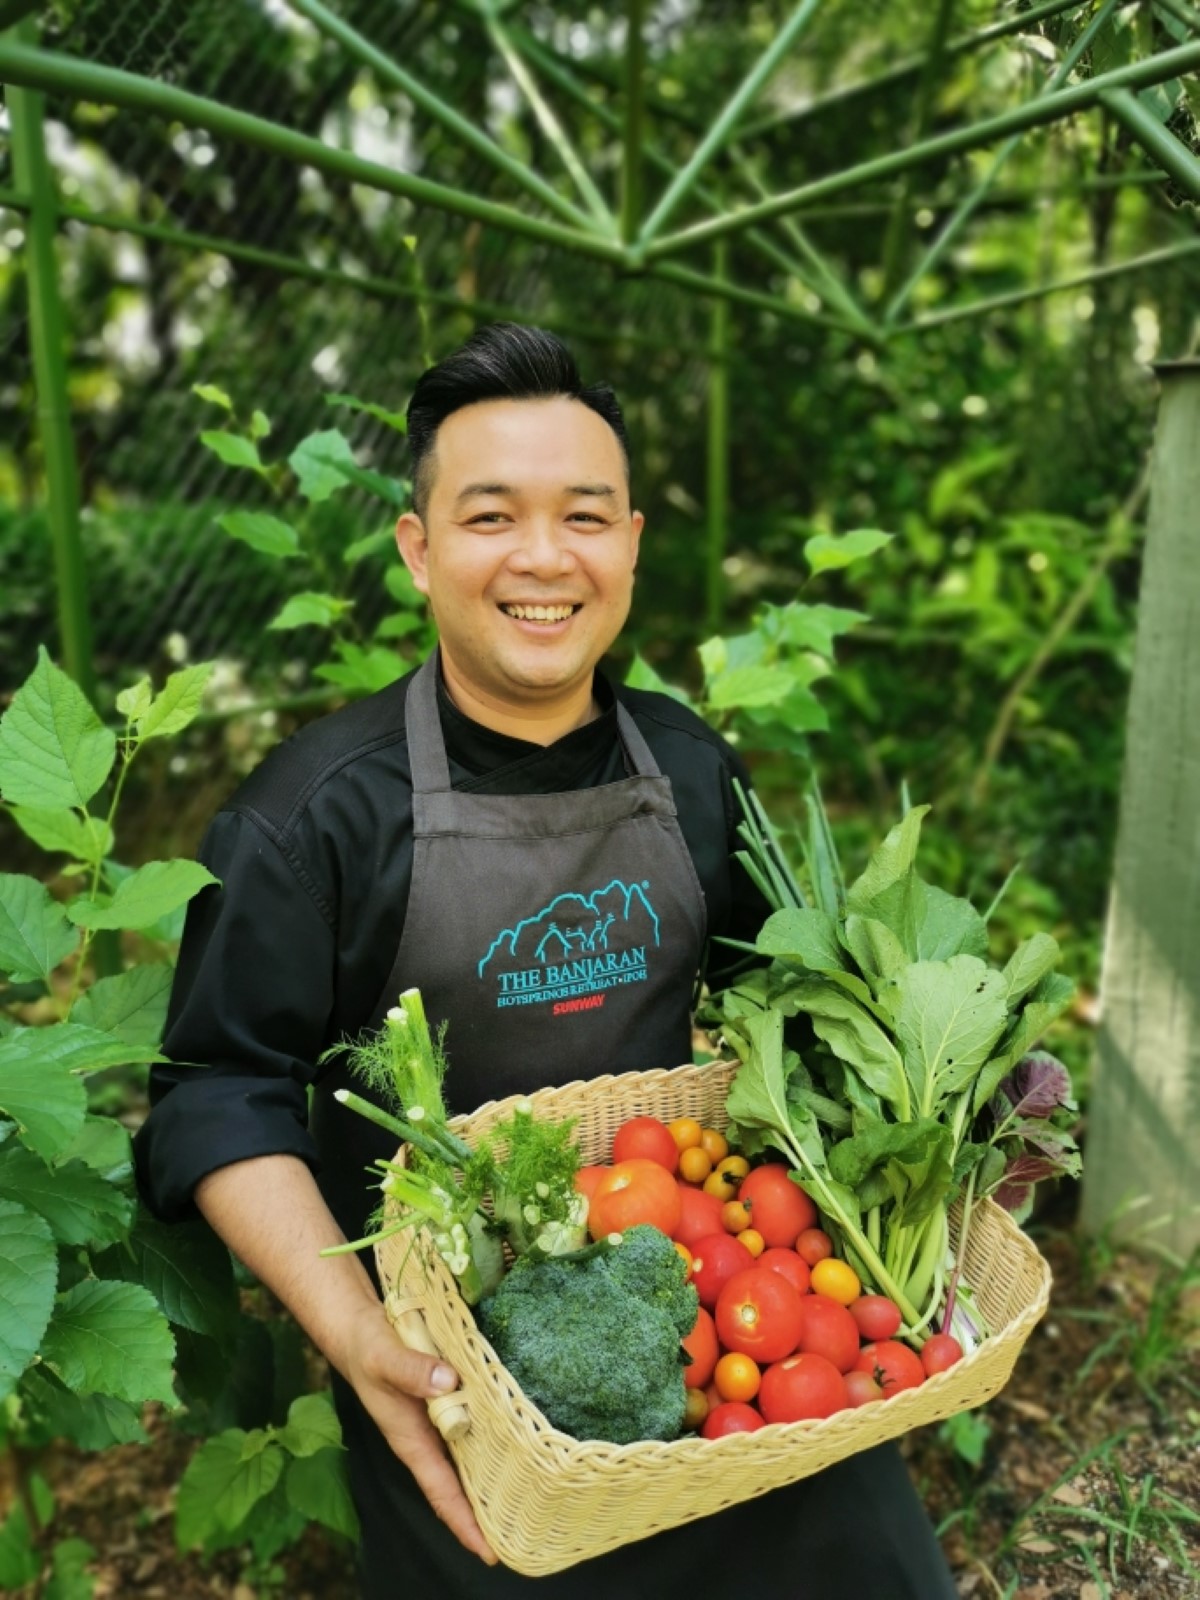 A portrait-shot of Chef Lee Choon Boon carrying a basket of vegetables